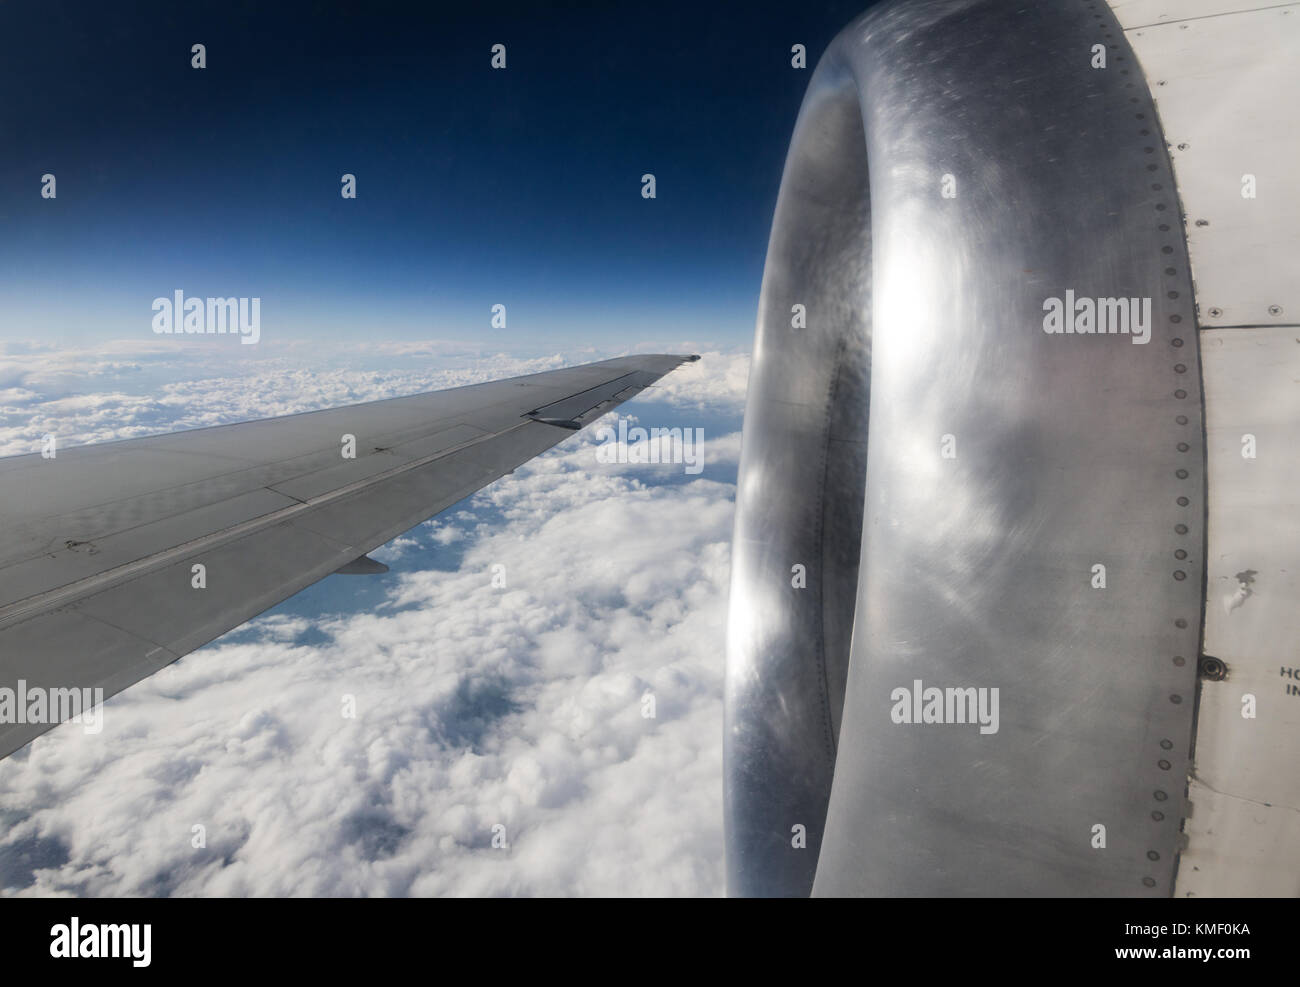 airplane engine and wing seen in flight Stock Photo